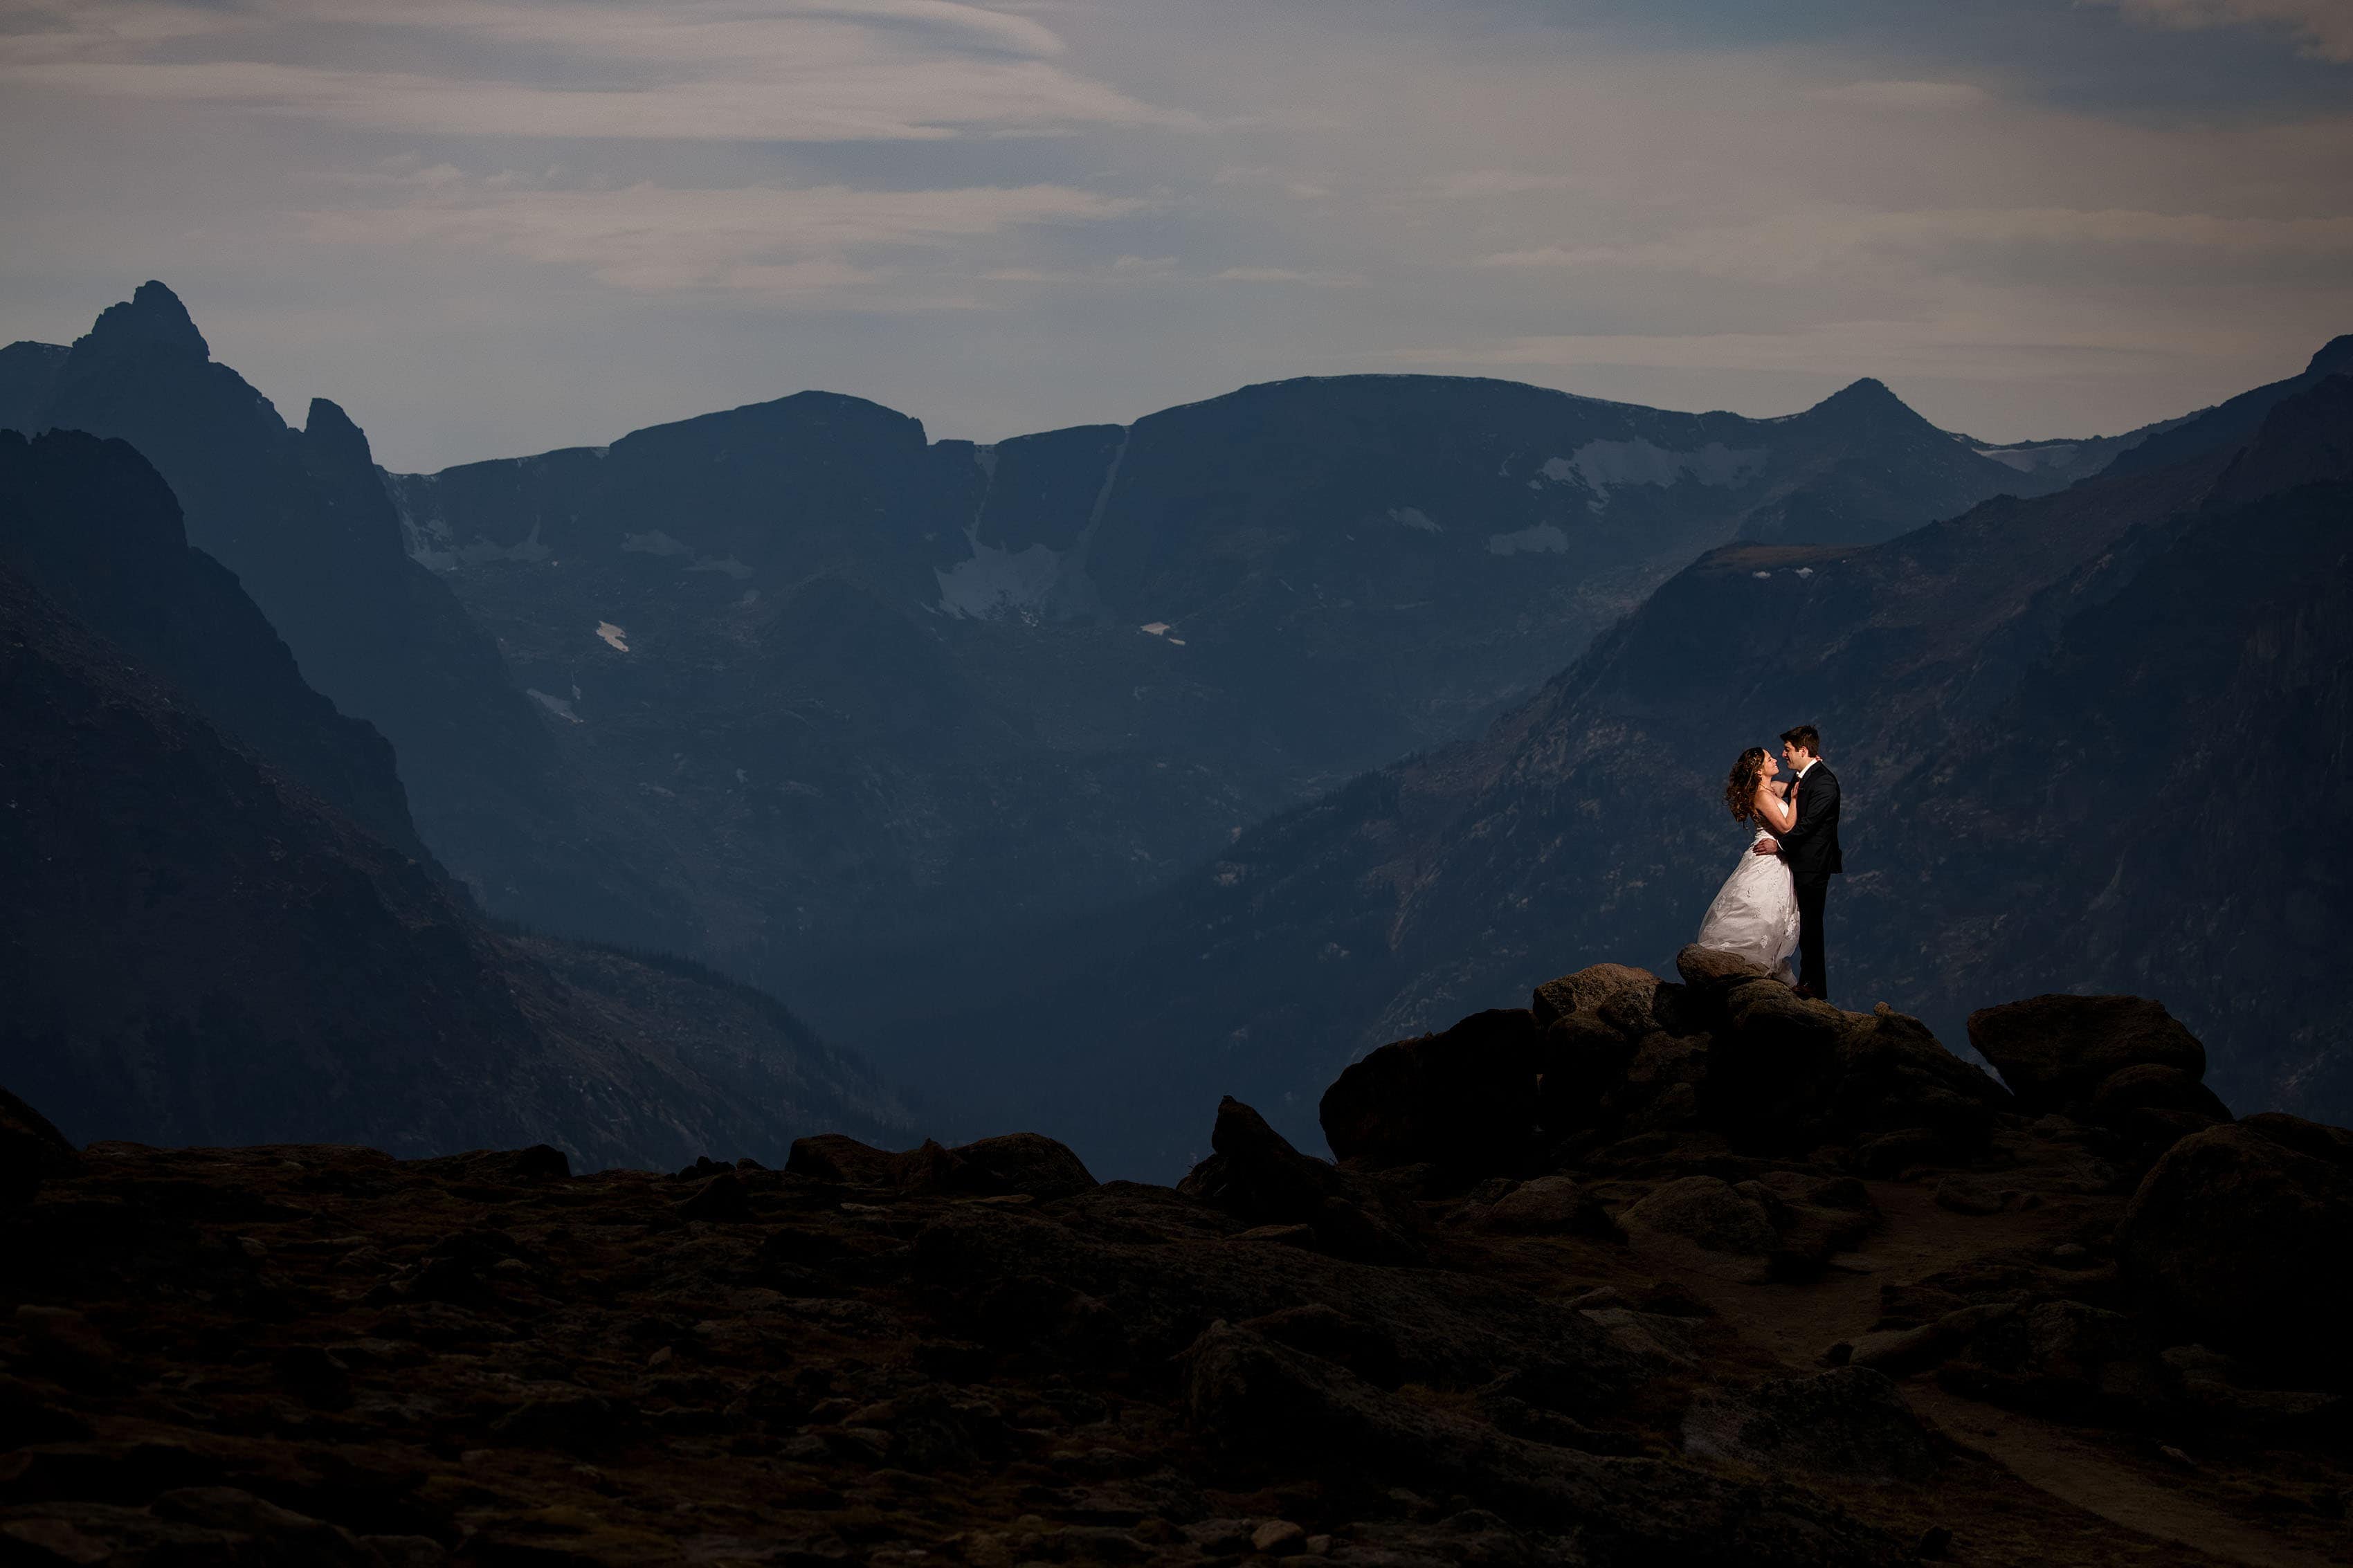 Chris and Madeline share a moment together atop Trail Ridge Road in Rocky Mountain National park